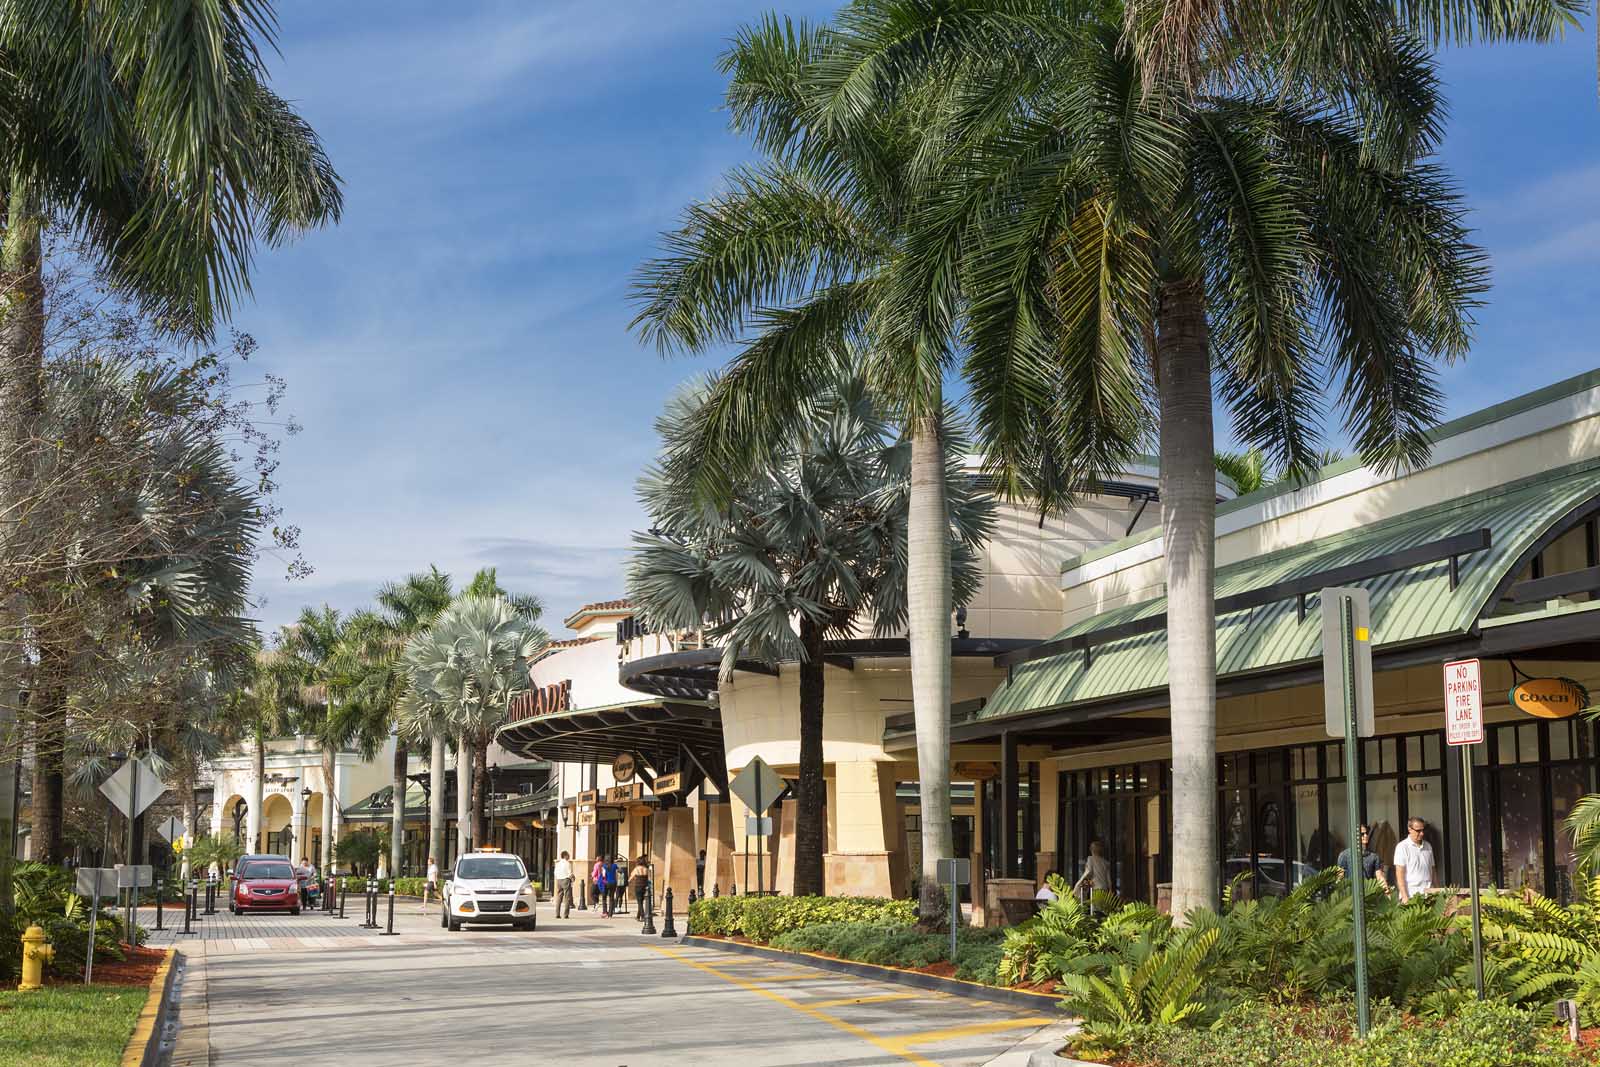 Sawgrass Mills Shopping Center in Fort Lauderdale